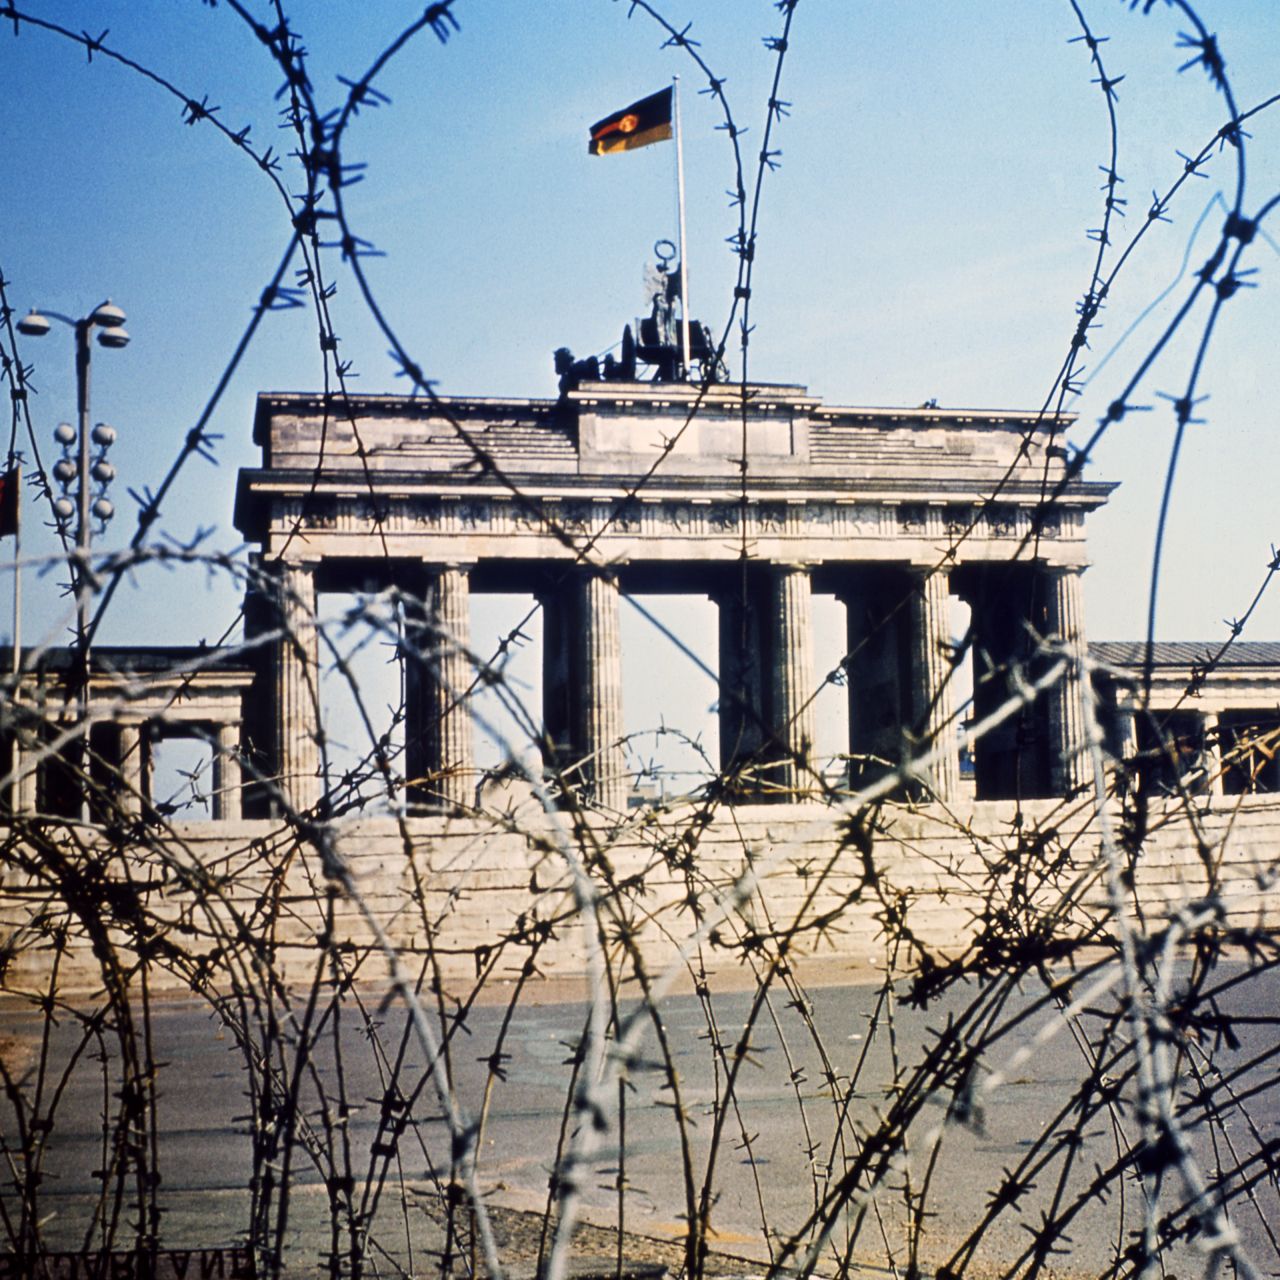 It's 1968, and Berlin's Brandenburg Gate is seen through a swirl of barbed wire. BFC came to represent football power in the east of the divided city.